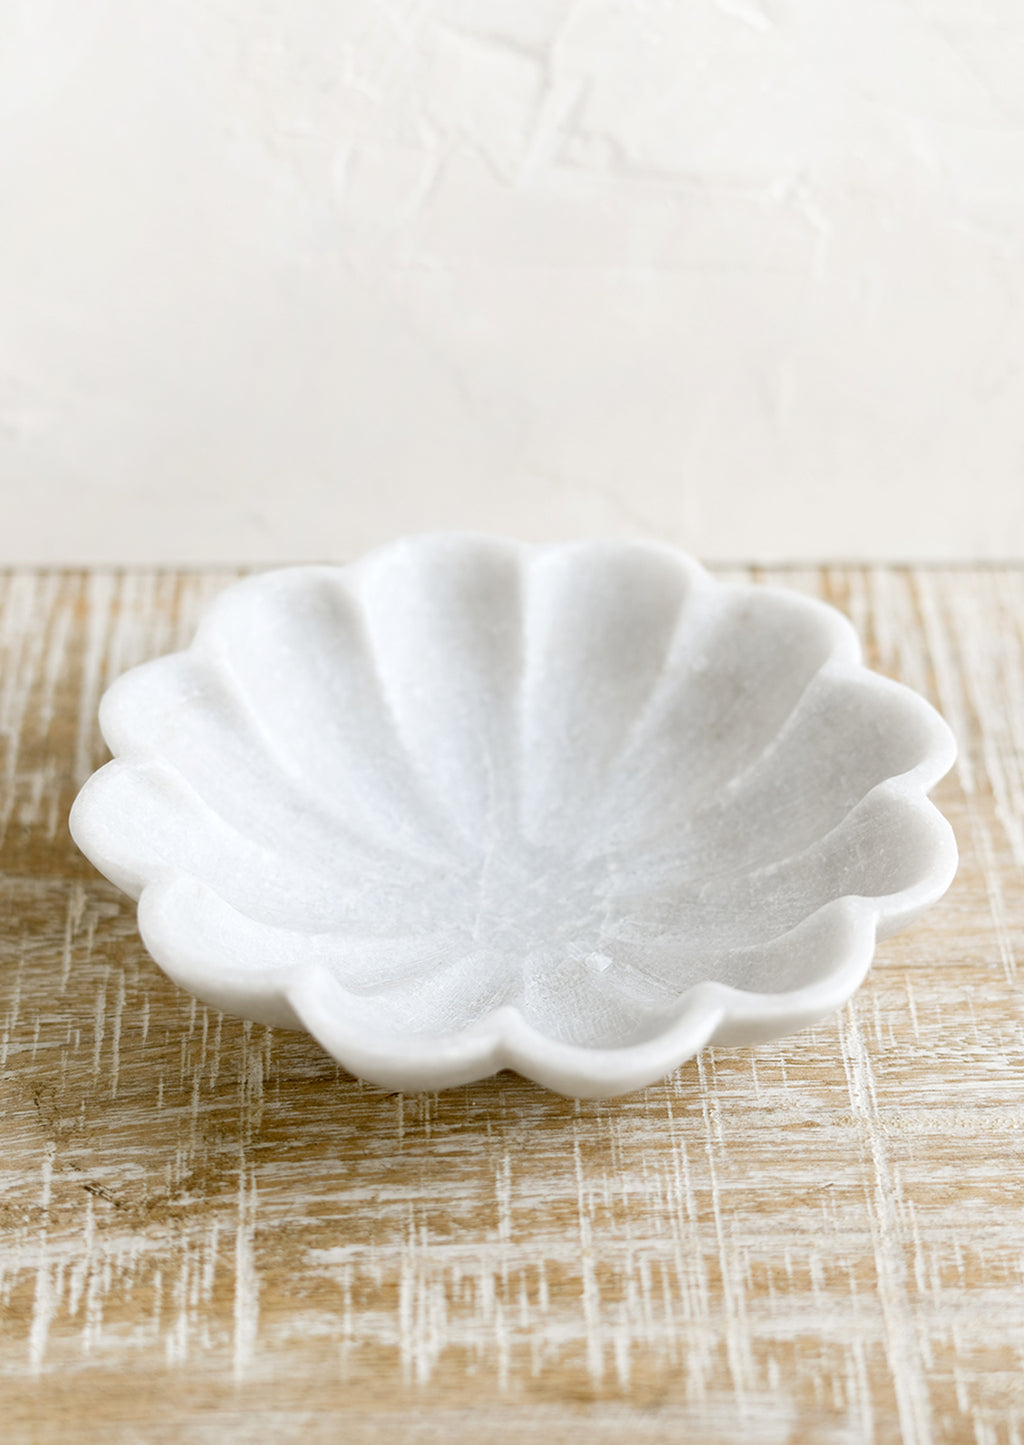 2: A shallow marble dish with curvy scalloped design.